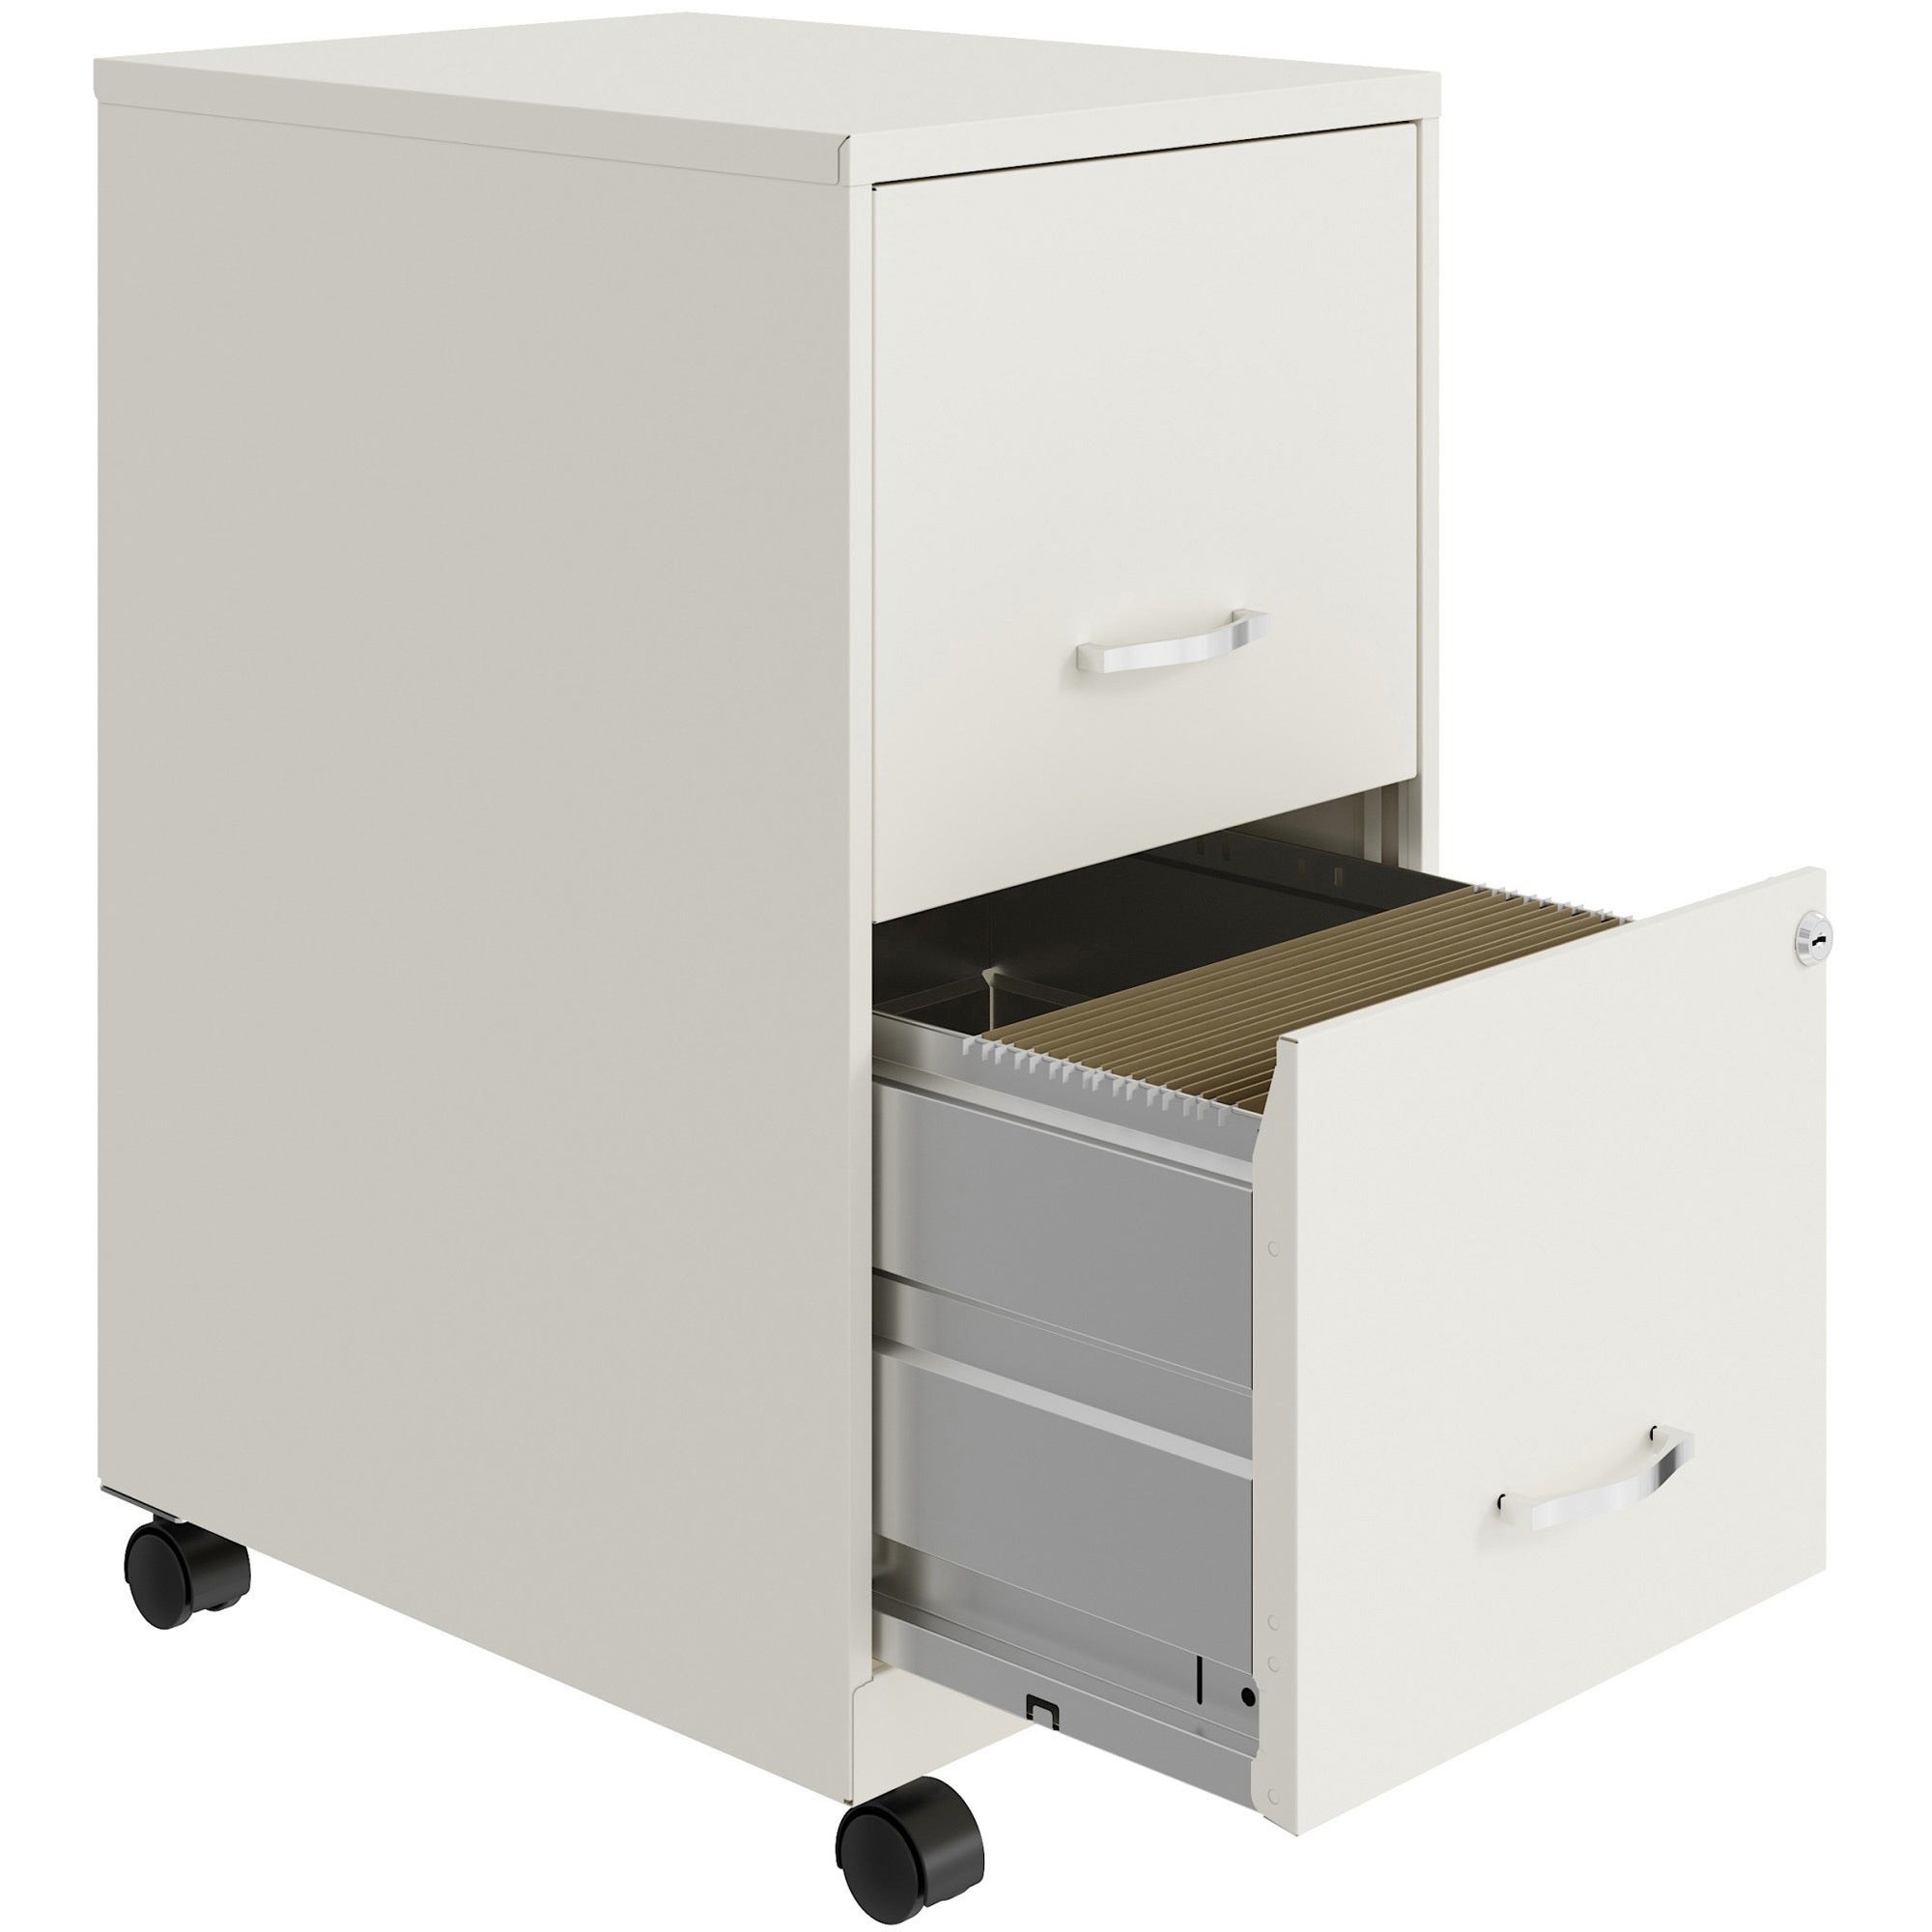 nusparc-mobile-file-cabinet-142-x-18-x-265-for-file-letter-mobility-locking-drawer-glide-suspension-3-4-drawer-extension-cam-lock-nonporous-surface-white-painted-steel-steel-recycled-assembly-required_nprvf218amwe - 5